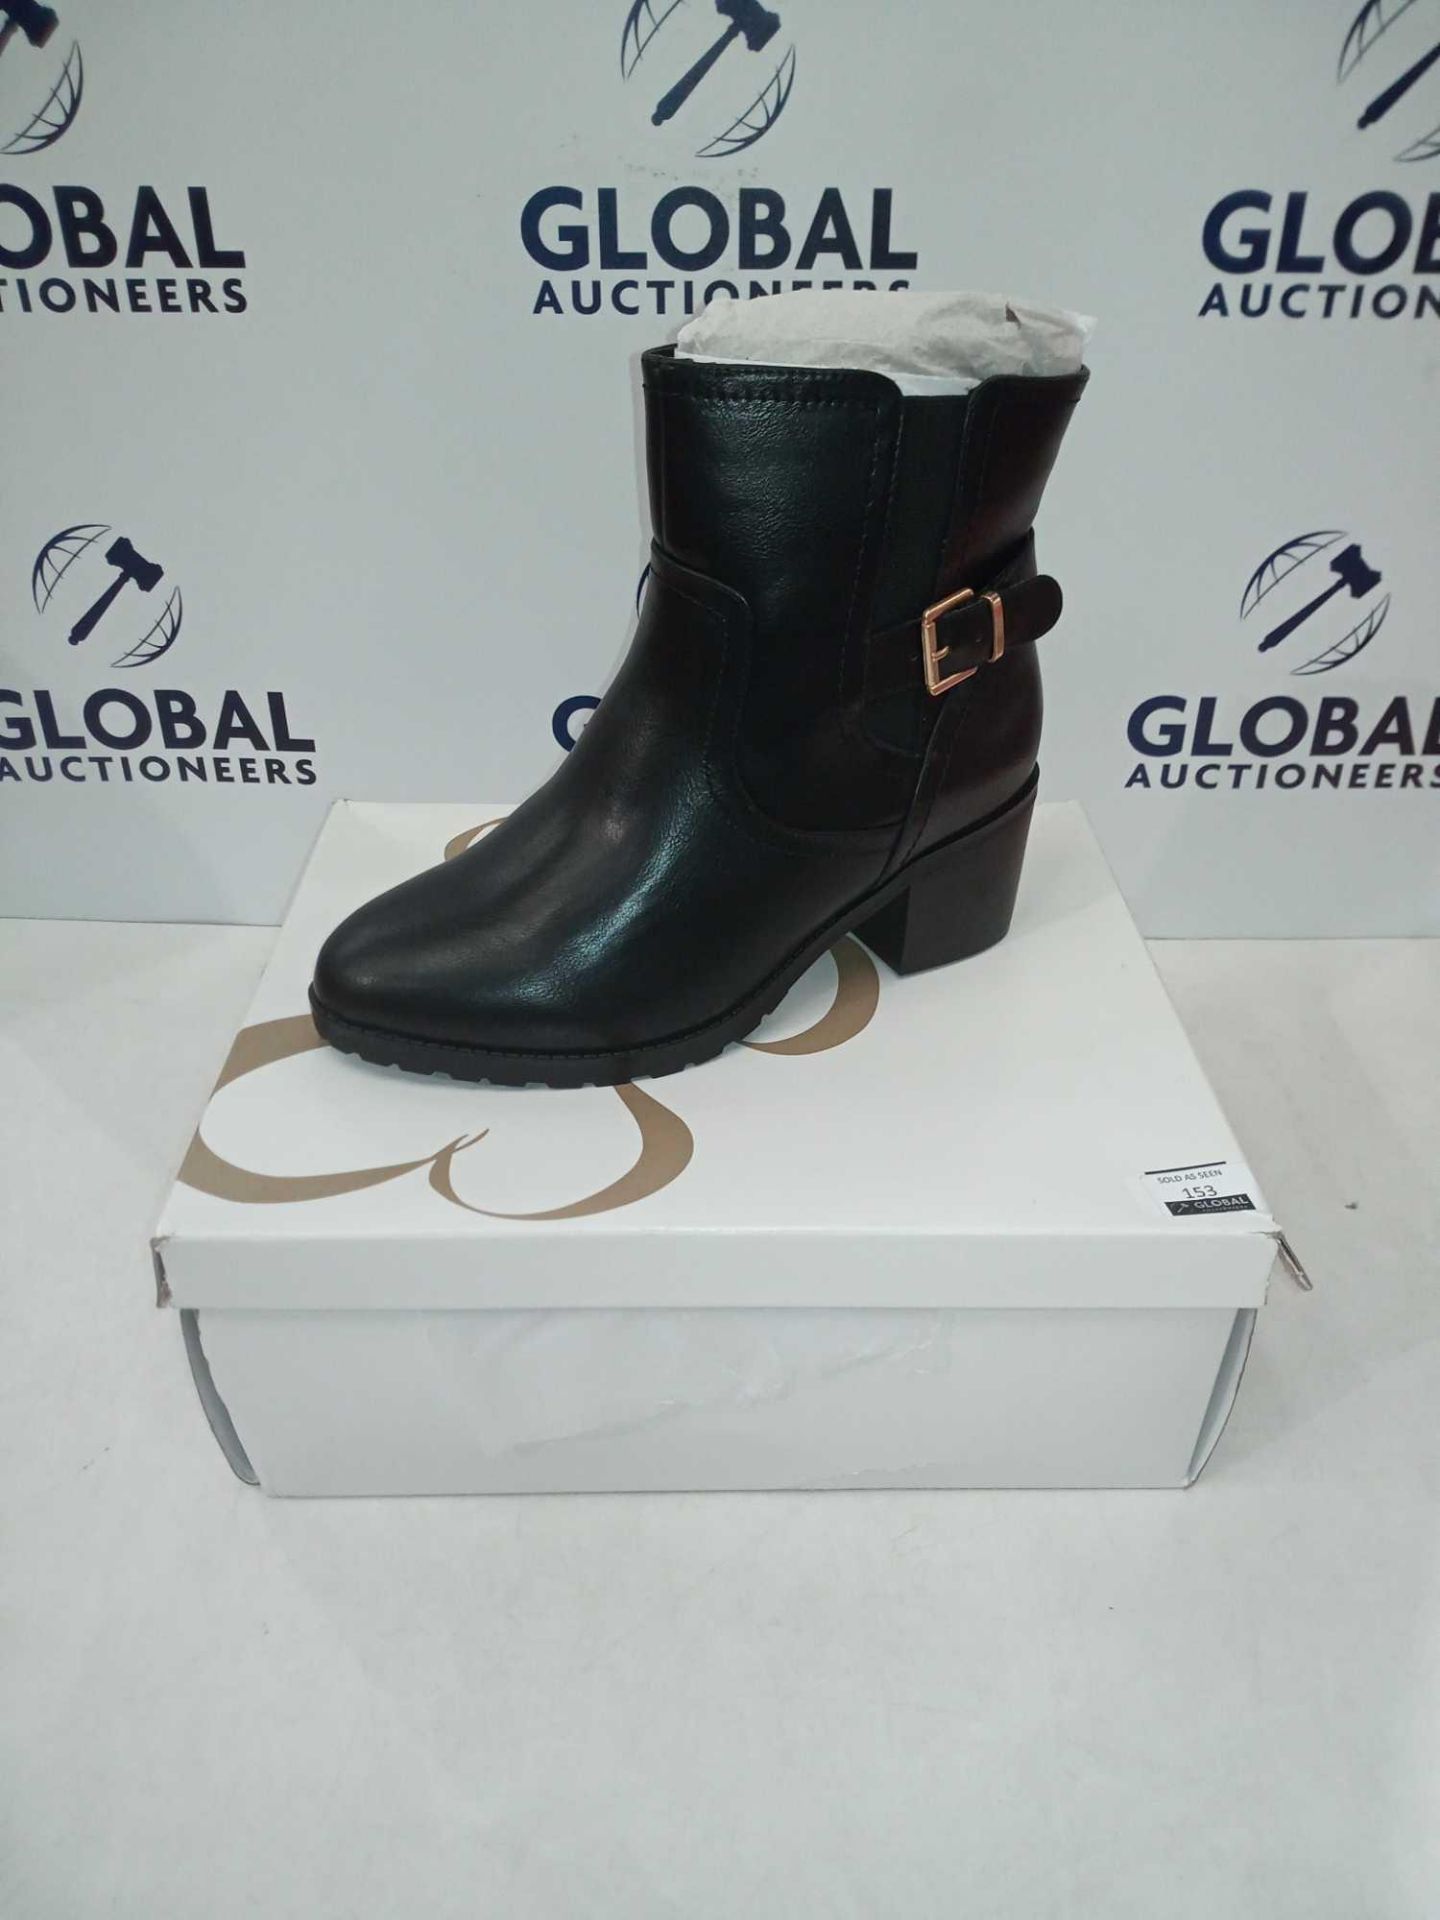 Rrp £50 Boxed Pair Of Black Leather Amelio Size 7 Women'S Boots